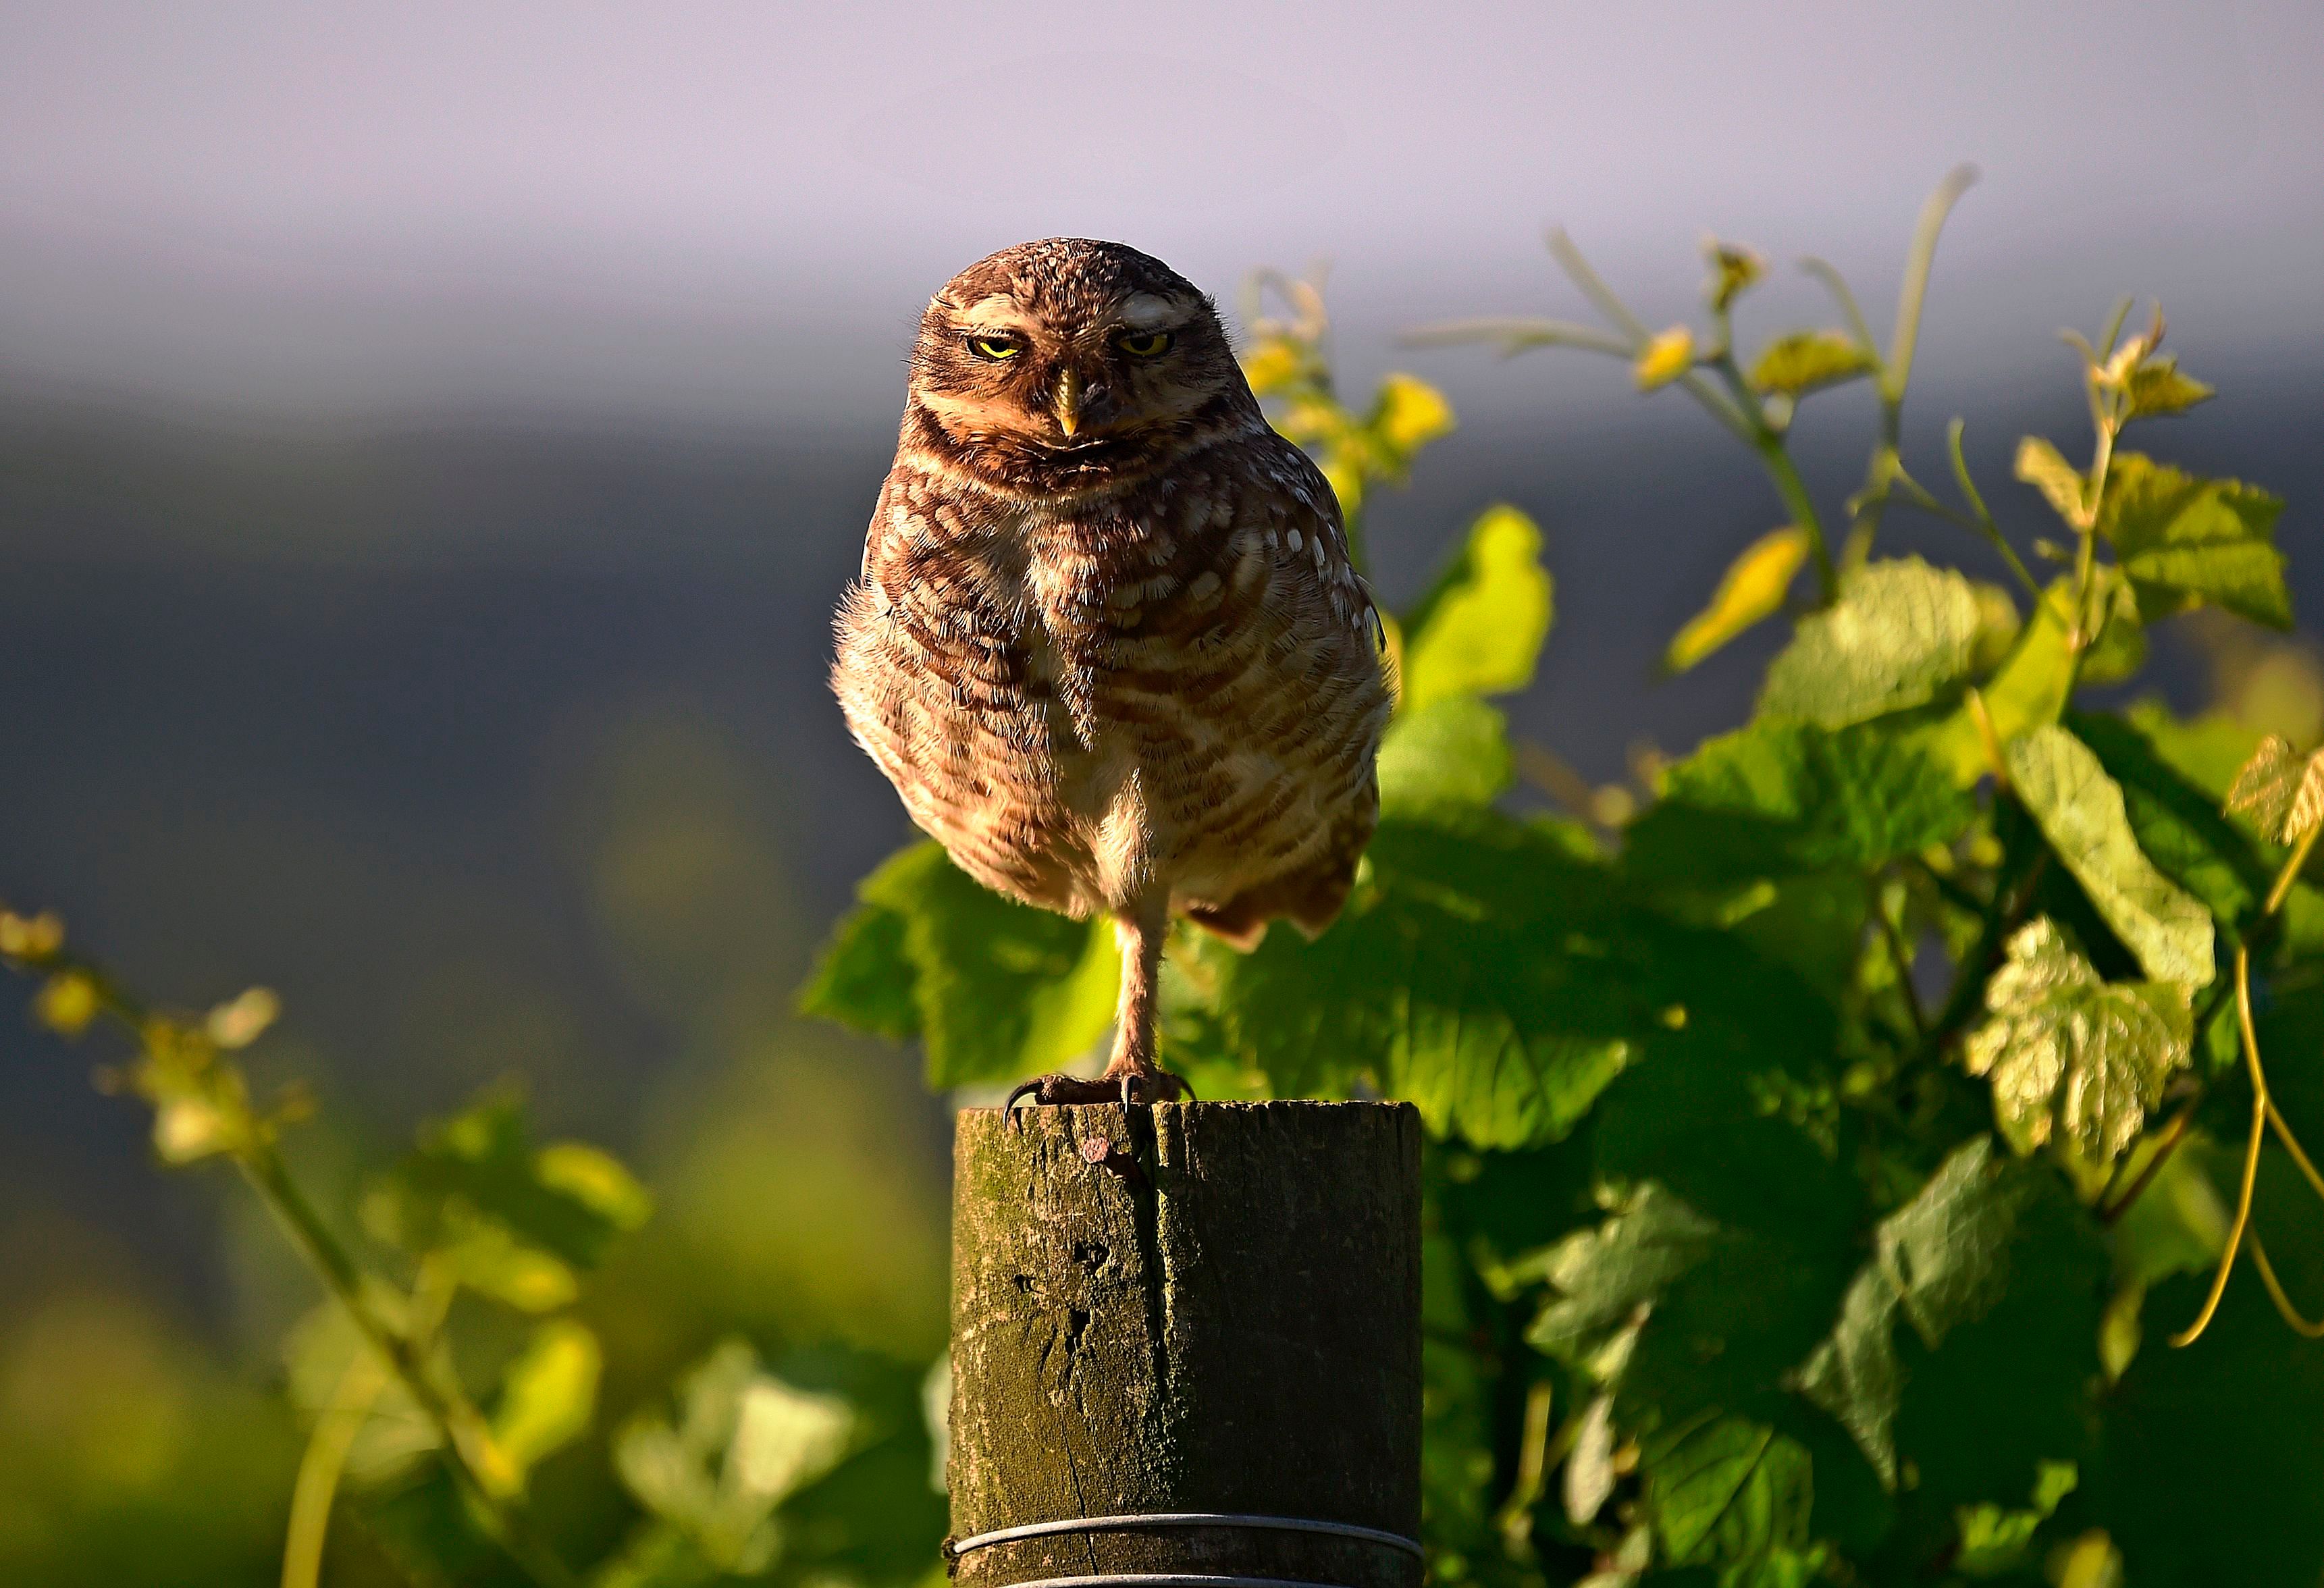 An owl is seen at the Familia Geisse vineyard in Pinto Bandeira, Rio Grande do Sul state, Brazil. (AFP Photo)